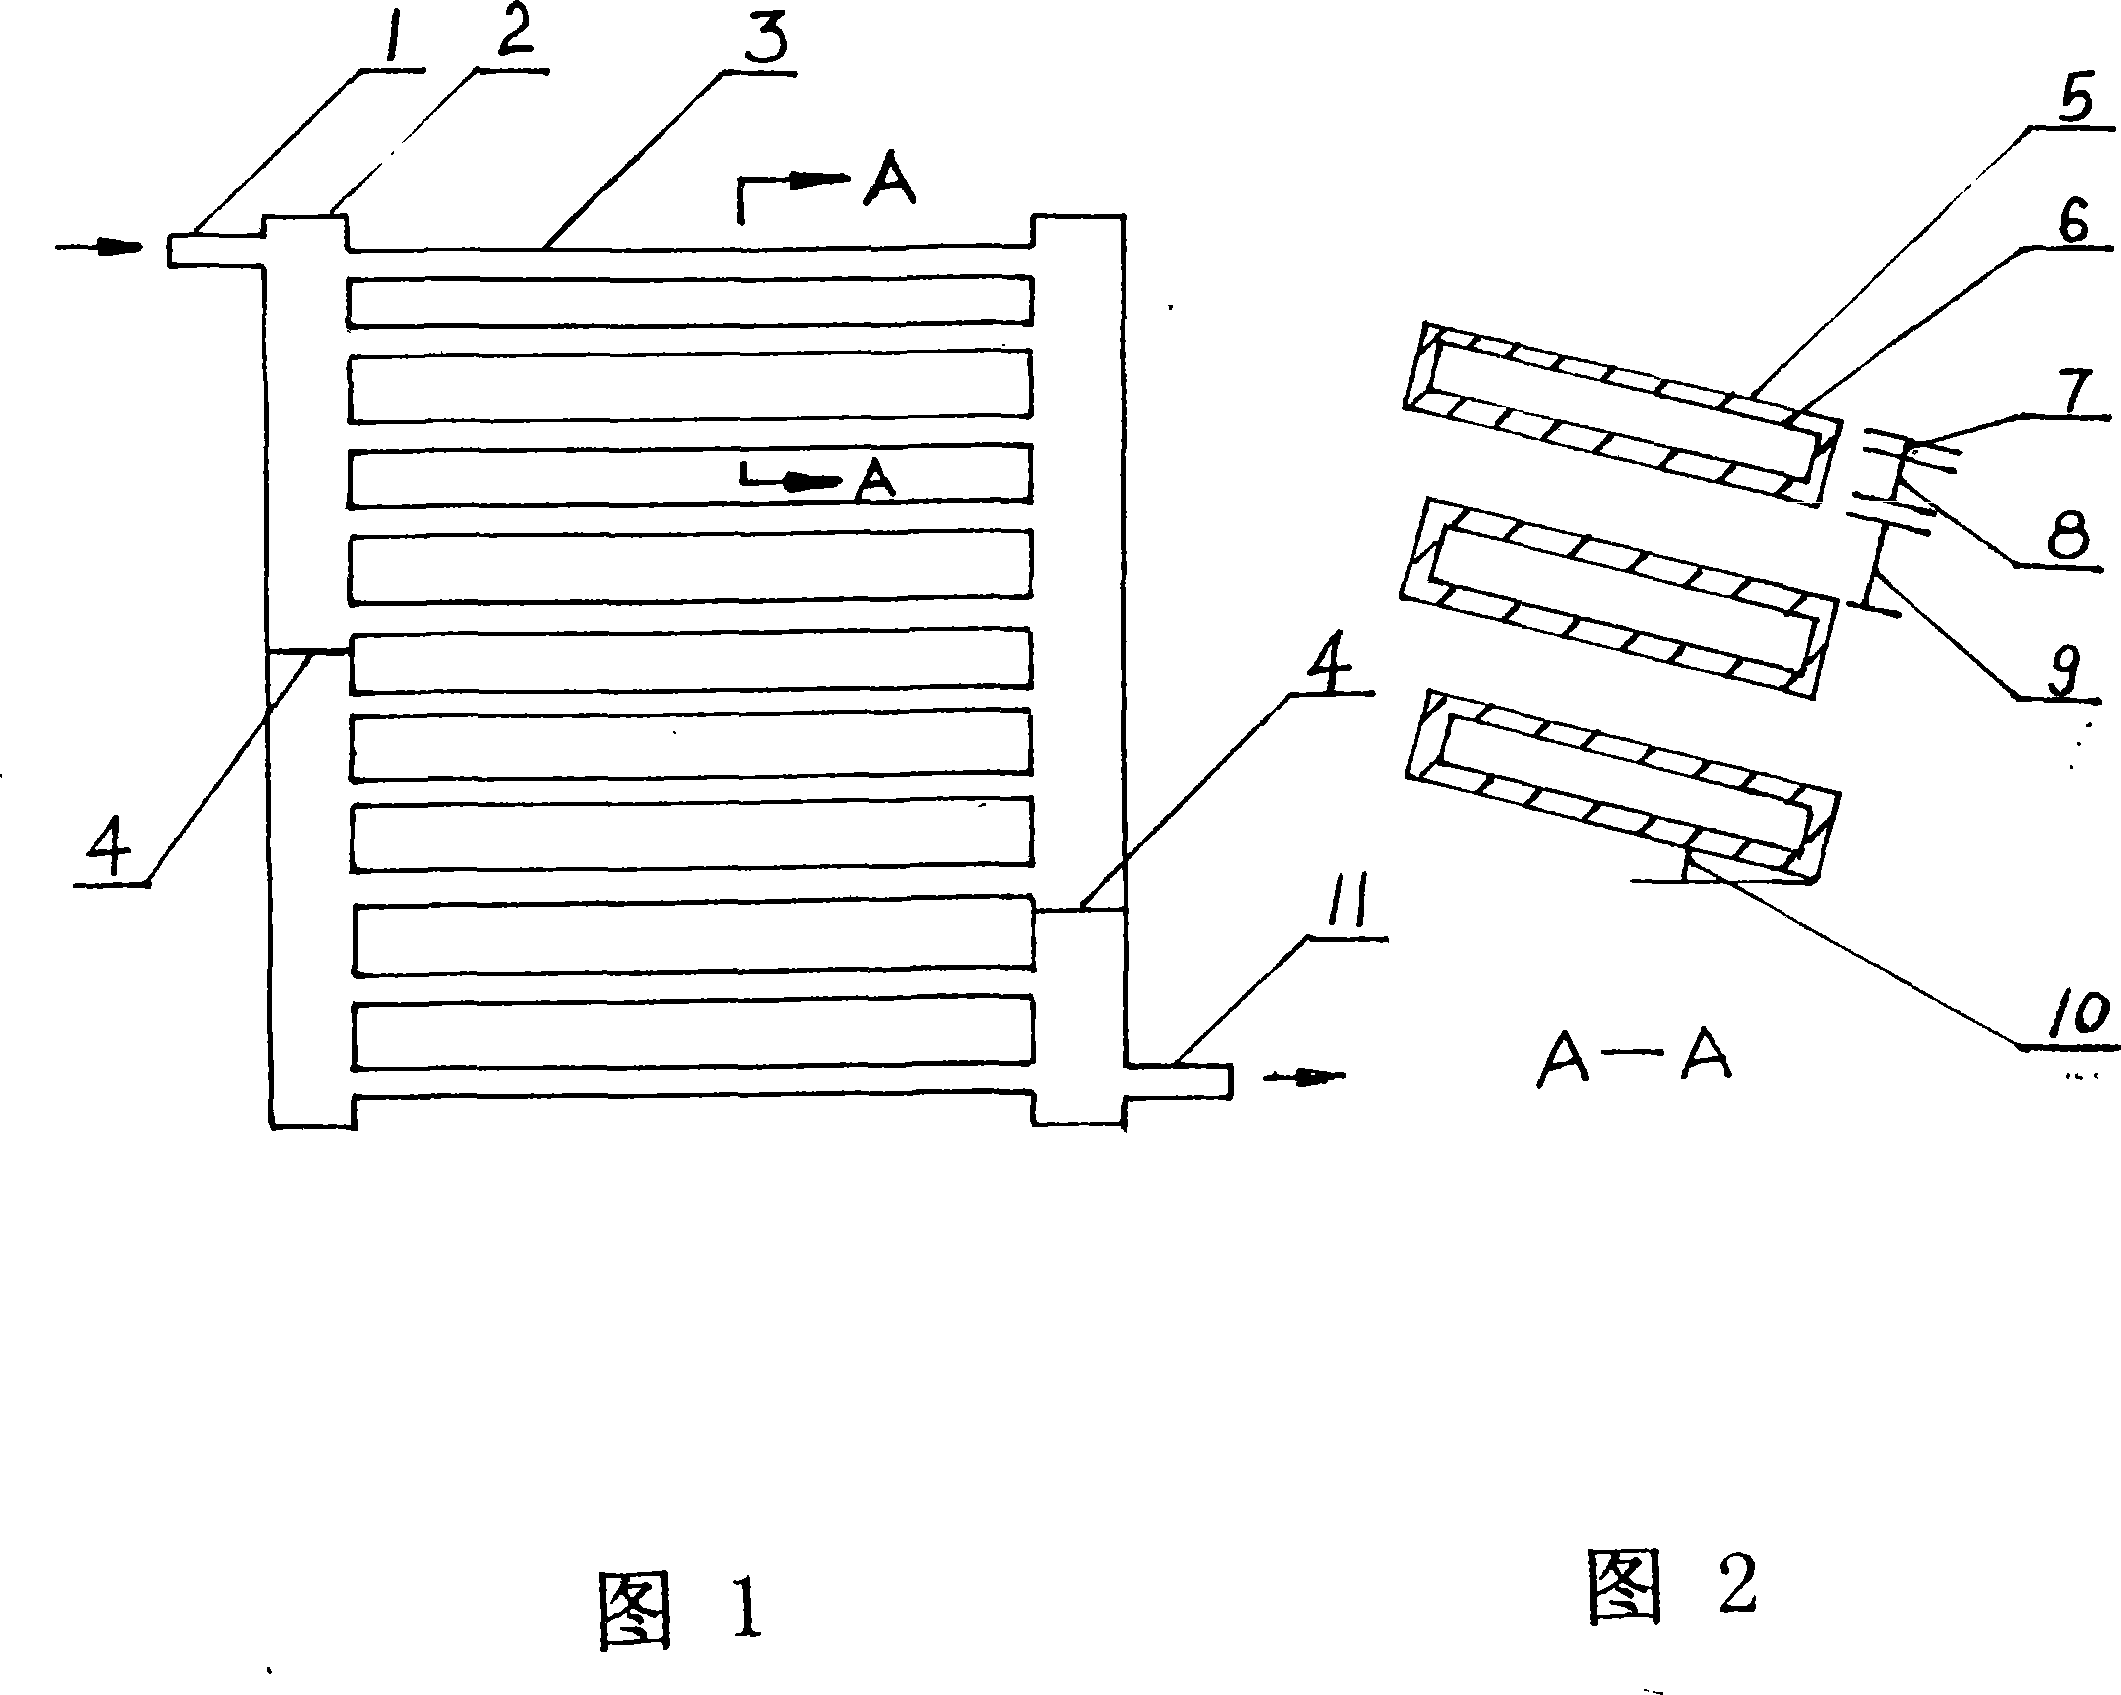 Heat transmission belt of household air conditioner and its special structure during application